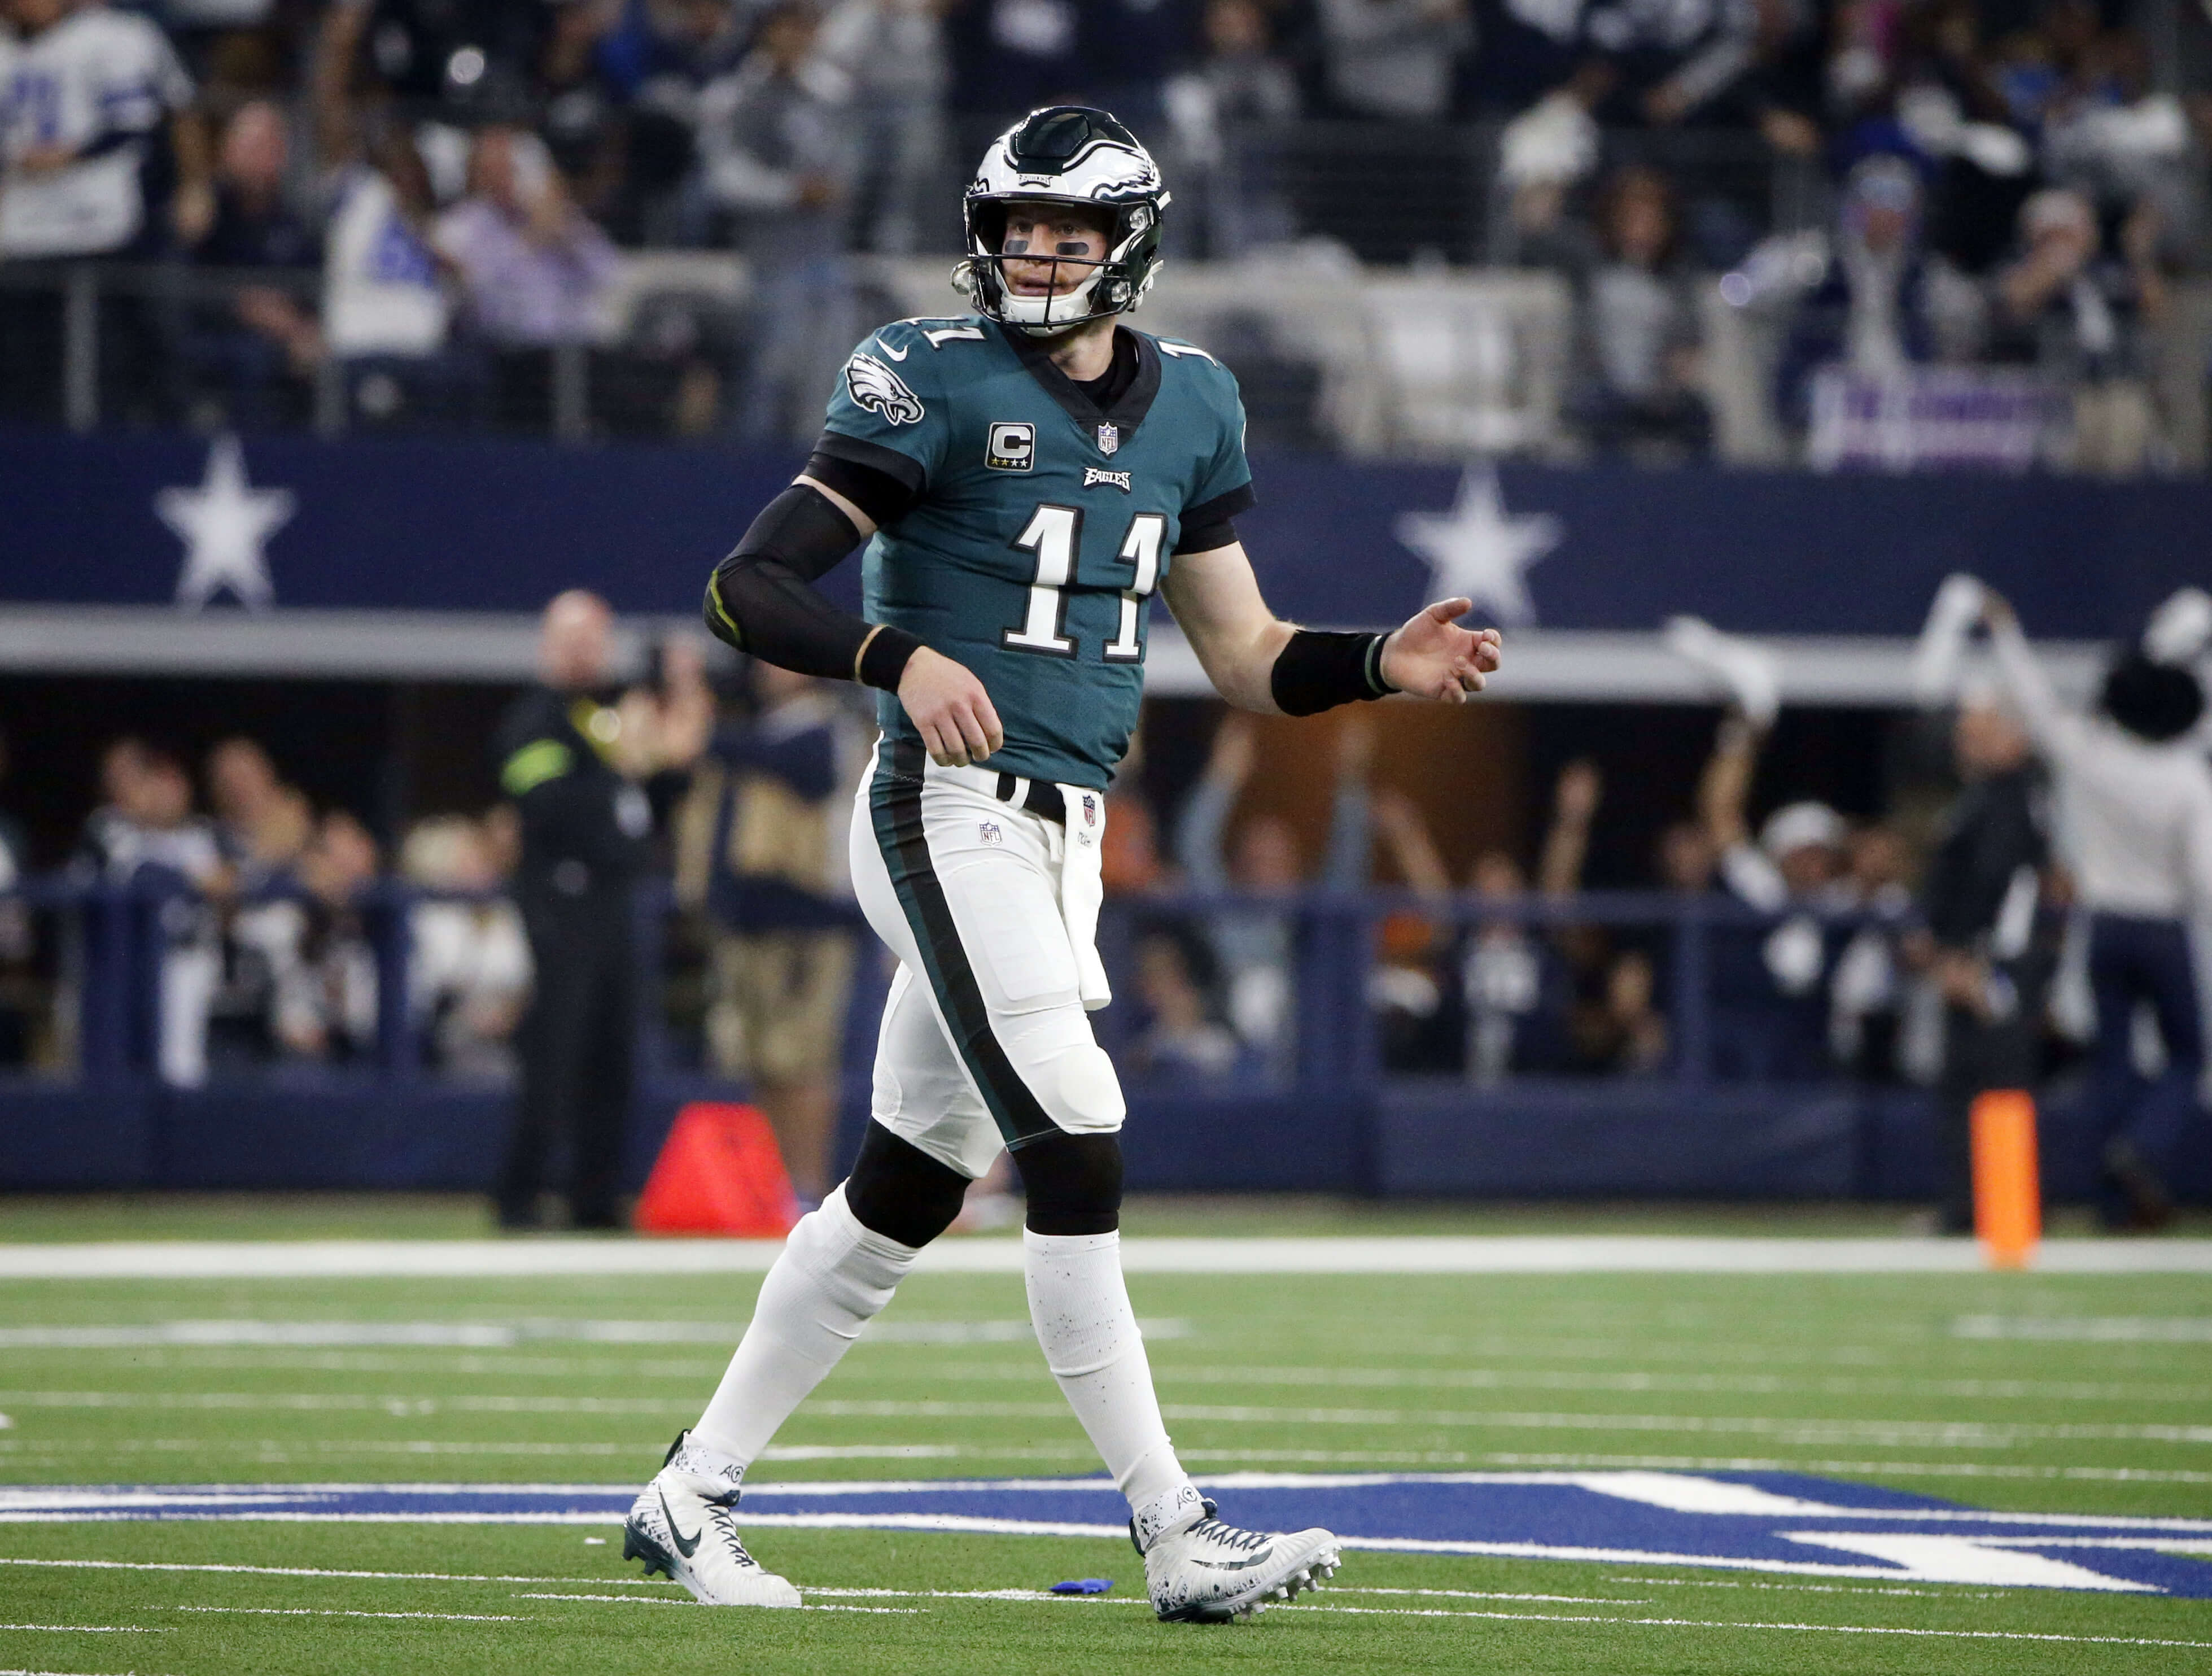 AP Sources: Carson Wentz hasn’t been ruled out for next game